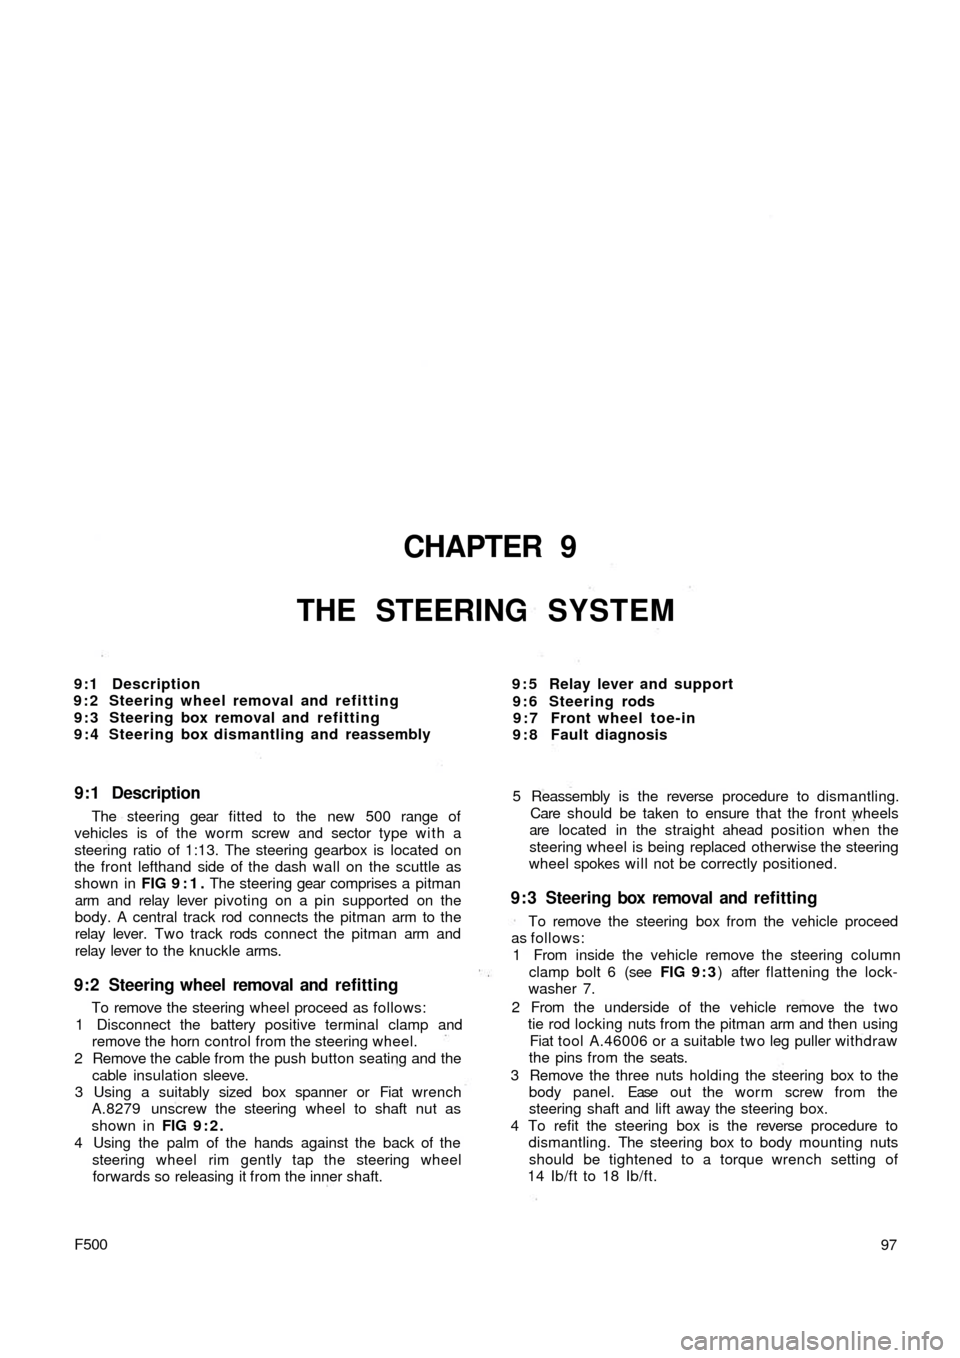 FIAT 500 1969 1.G Workshop Manual CHAPTER 9
THE STEERING SYSTEM
9 : 5 Relay lever and support
9 : 6 Steering rods
9 : 7 Front wheel toe-in
9 : 8 Fault diagnosis 9:1 Description
9 : 2 Steering wheel removal and refitting
9 : 3 Steering